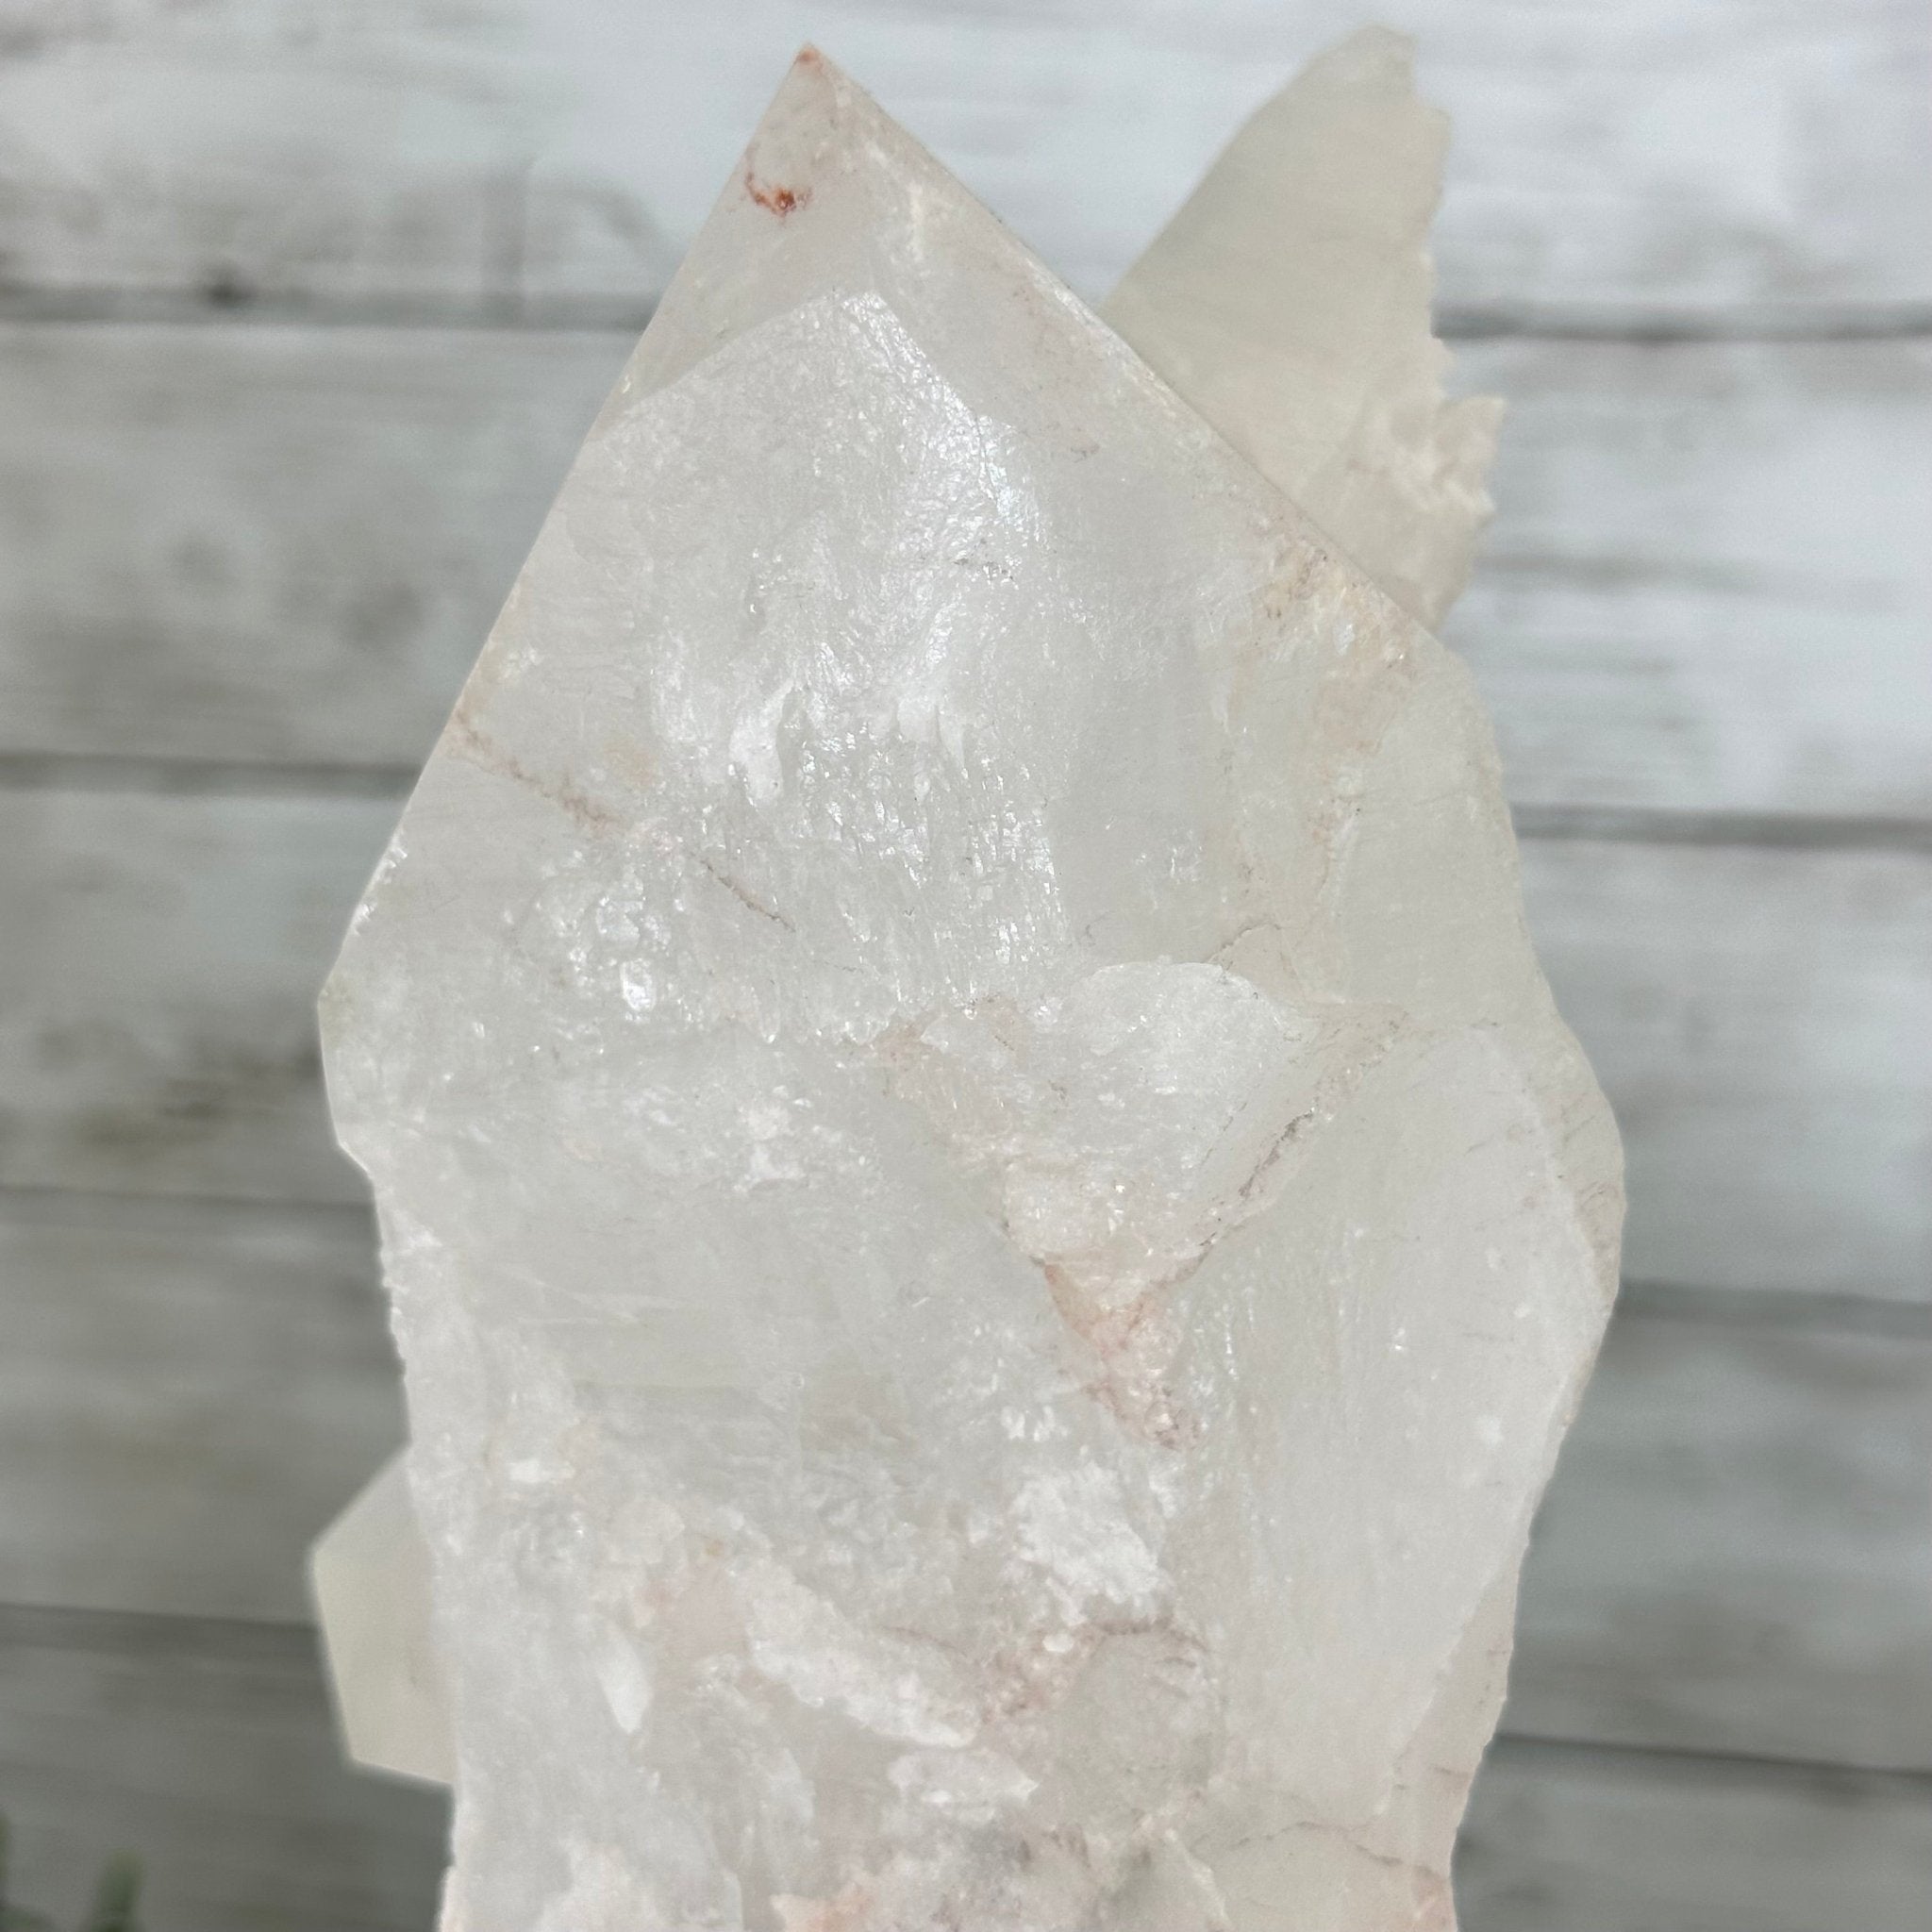 Clear Quartz Crystal Point on Fixed Base, 4.6 lbs & 11.0" Tall #3122CQ-008 - Brazil GemsBrazil GemsClear Quartz Crystal Point on Fixed Base, 4.6 lbs & 11.0" Tall #3122CQ-008Crystal Points3122CQ-008